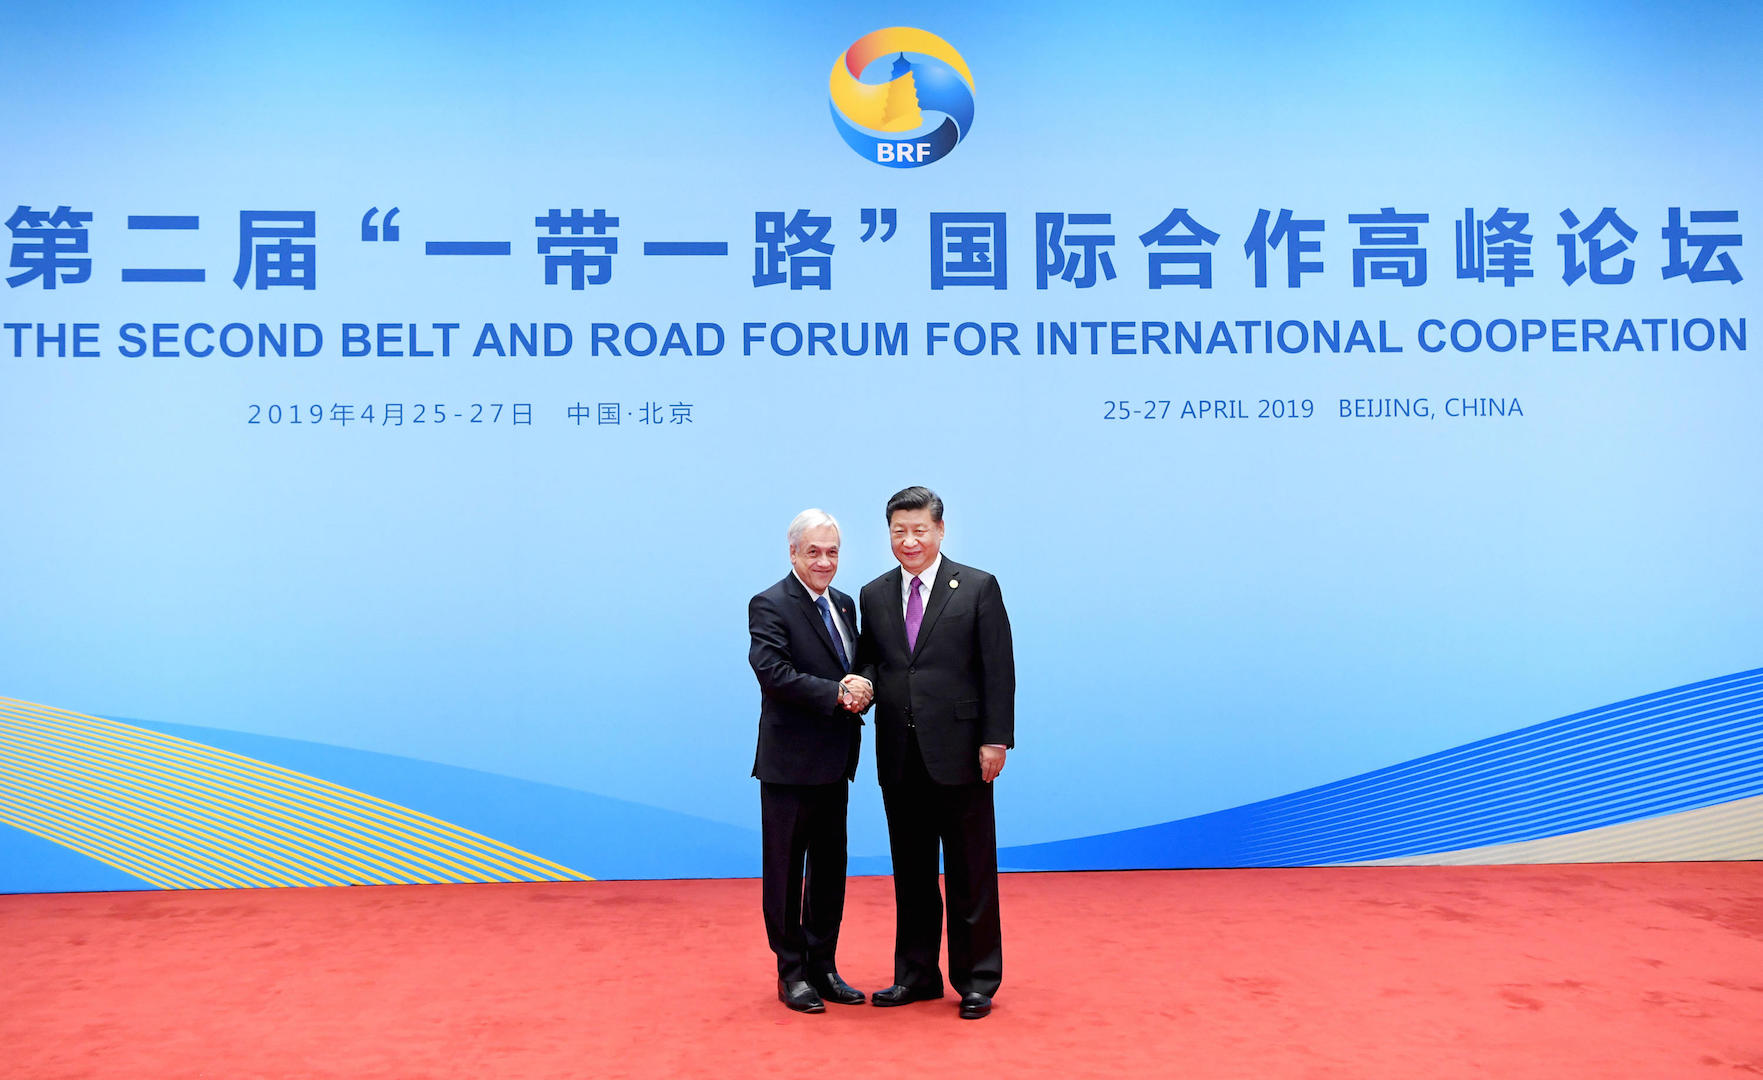 Chilean president Sebastián Piñera with Chinese counterpart Xi Jinping at the second Belt and Road Forum